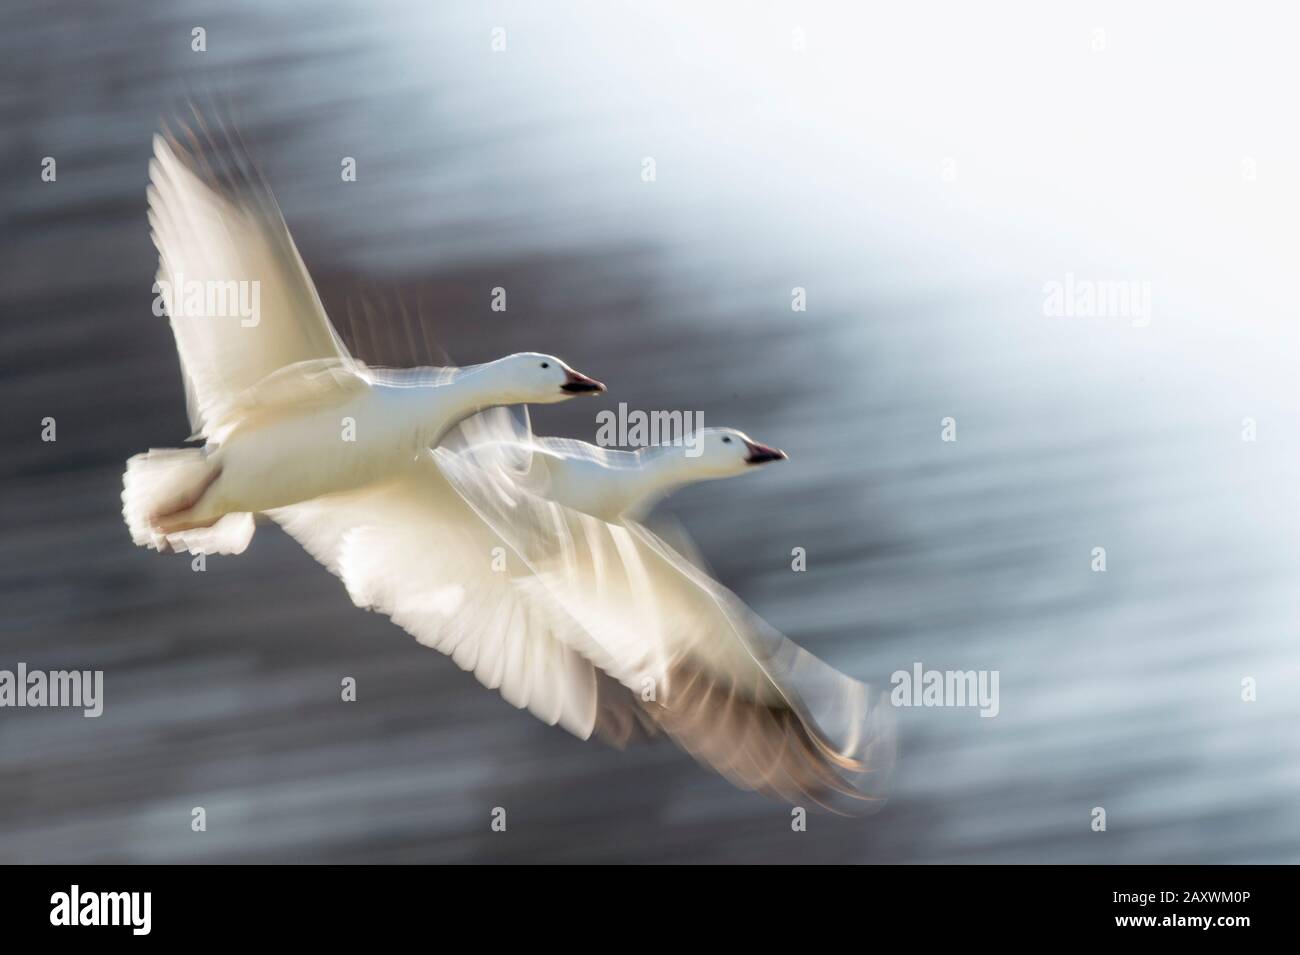 A pair of Snow Geese fly in front of a motion blurred dark tree background on a bright sunny day. Stock Photo